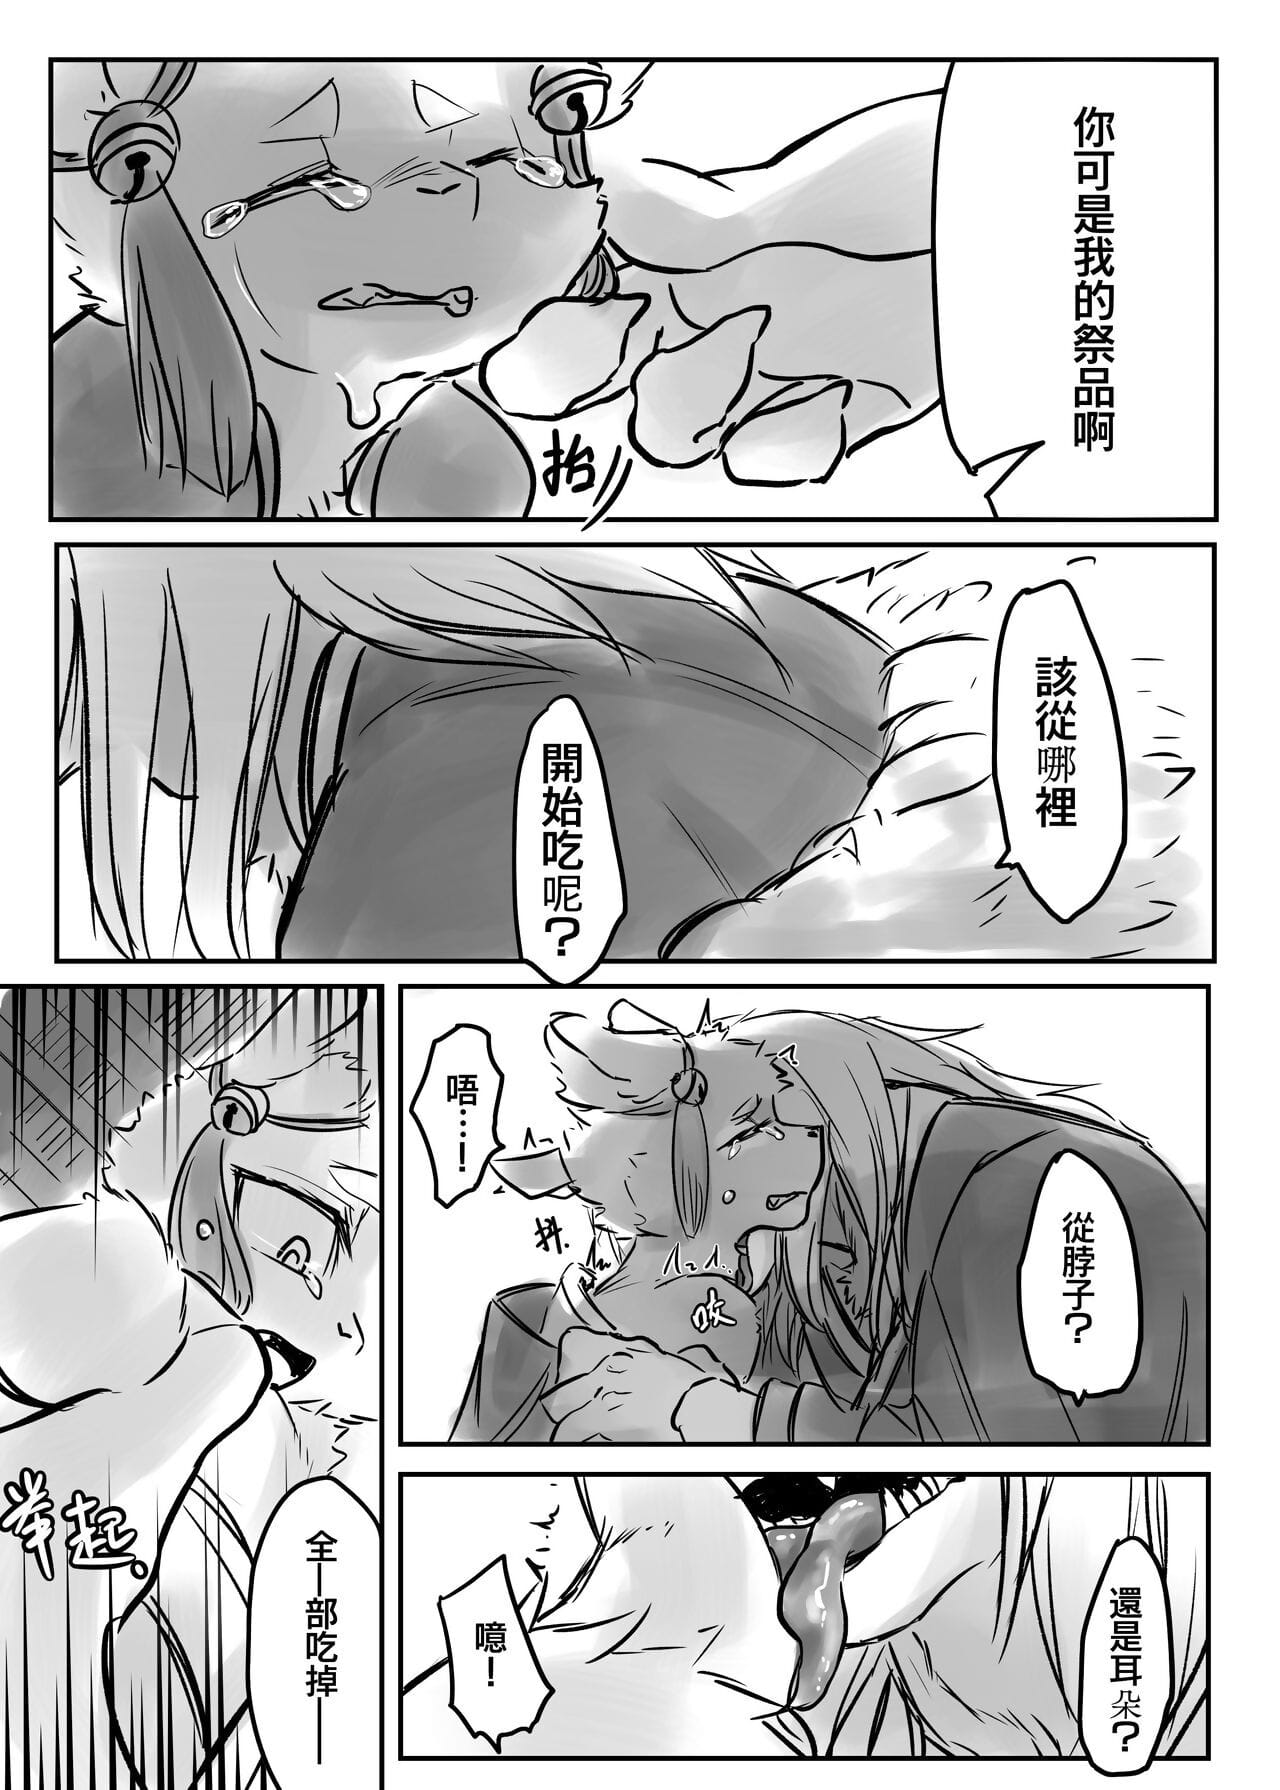 （the visitatore 他乡之人 by：鬼流 parte 3 page 1